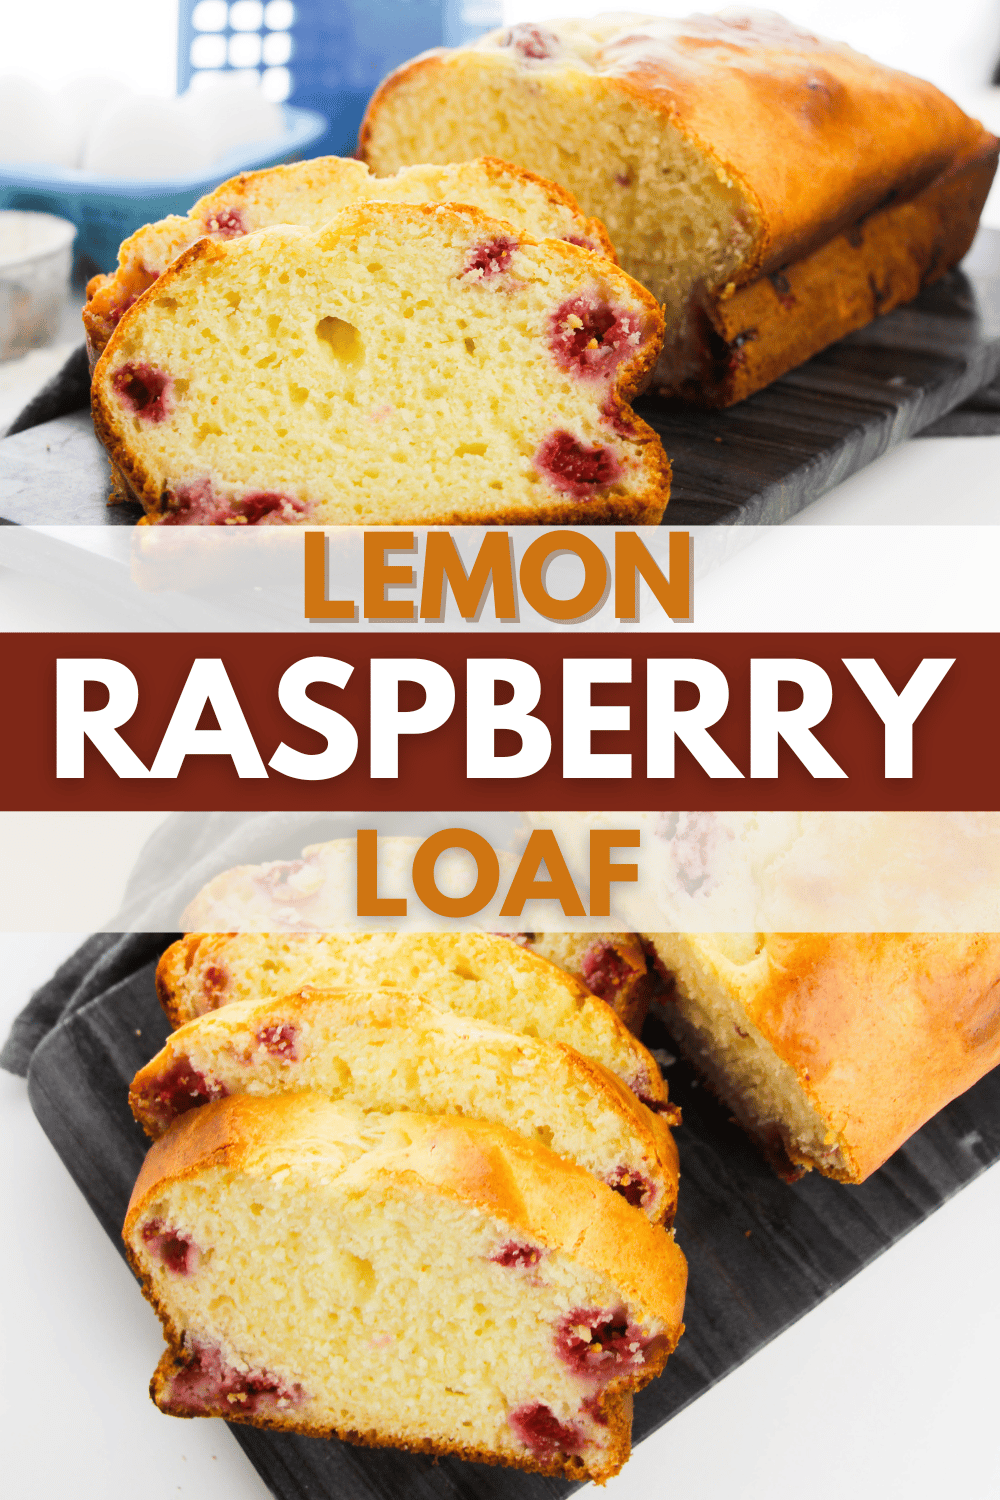 Lemon Raspberry Loaf is a delicious way to start your day! This quick and easy recipe is perfect for a busy morning. #lemonraspberryloaf #lemon #raspberry #breakfast #recipe via @wondermomwannab